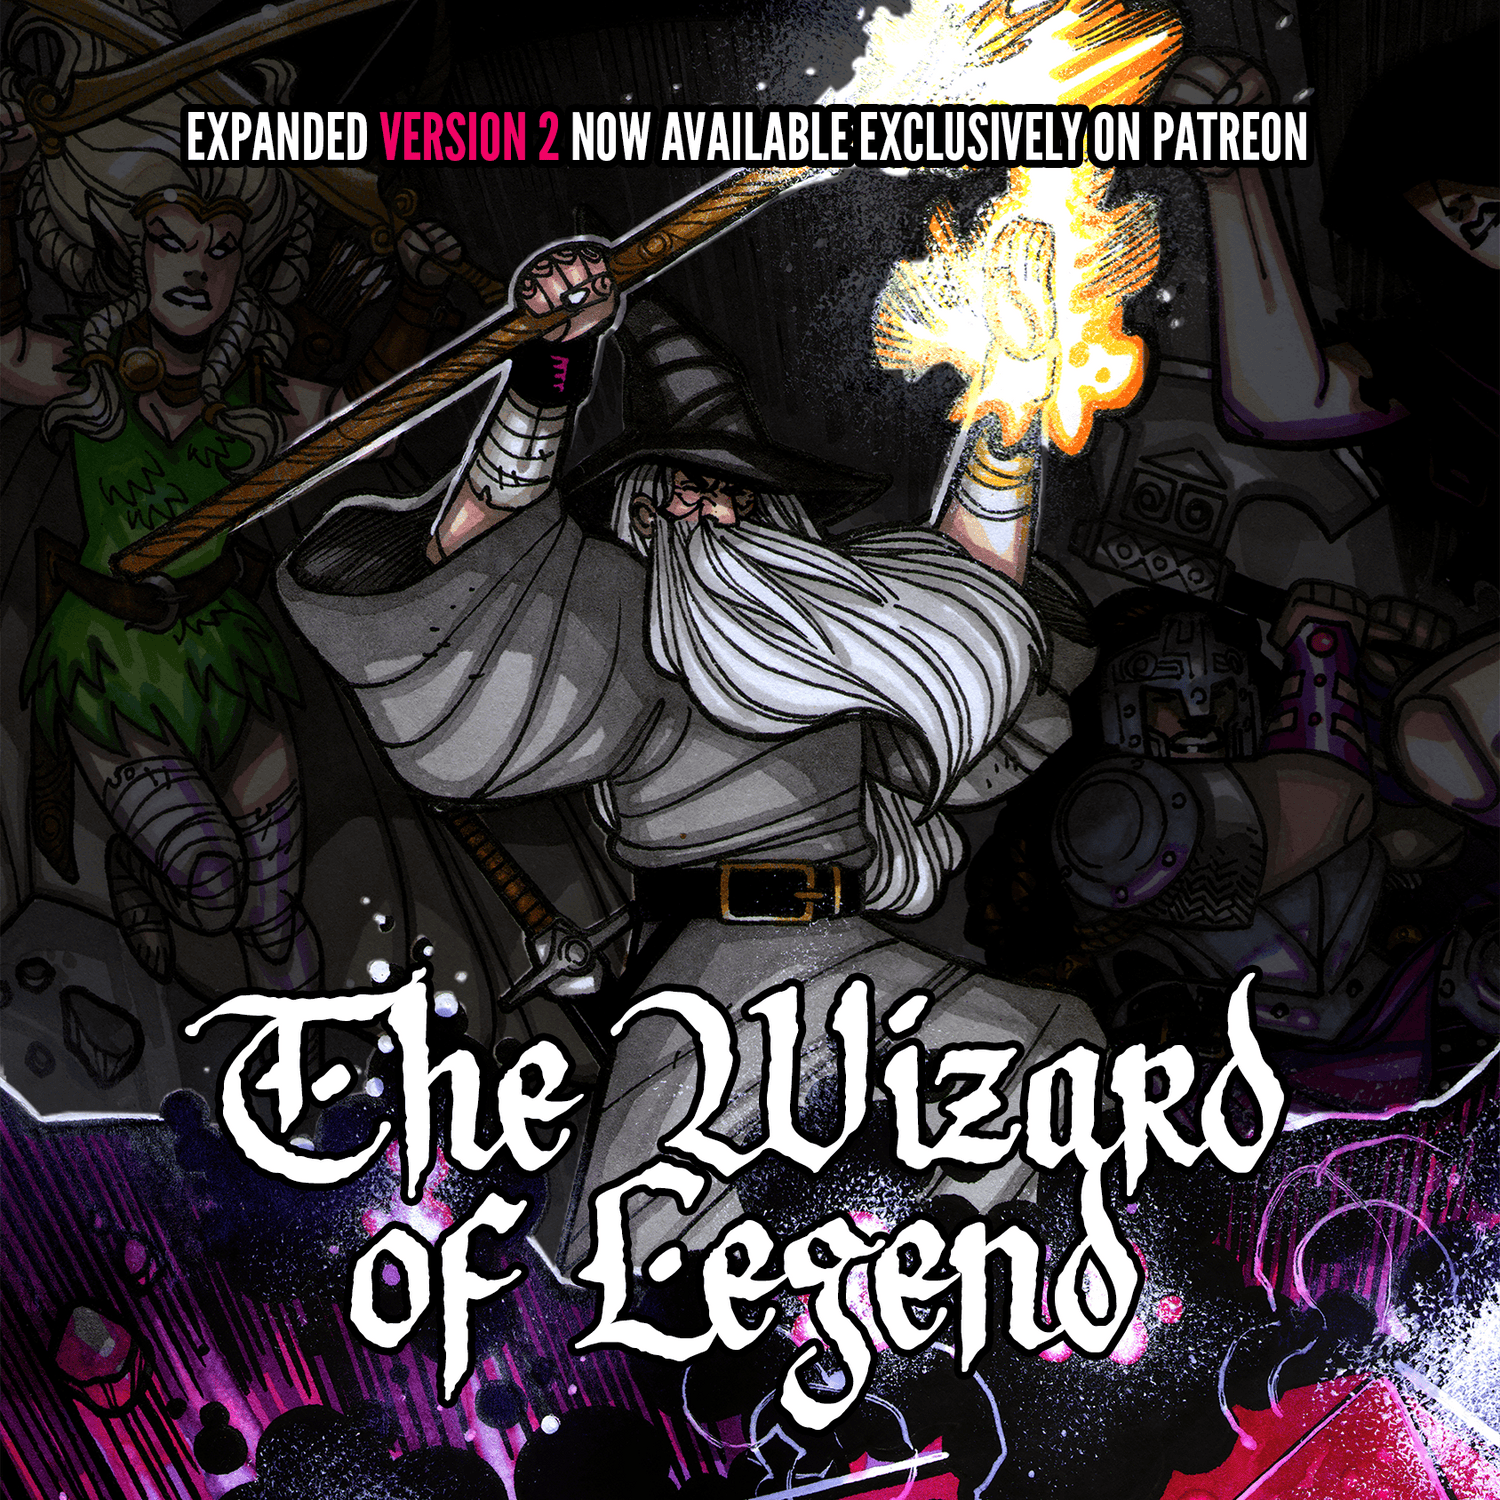 The Wizard of Legend: Expanded Version 2 available exclusively to members